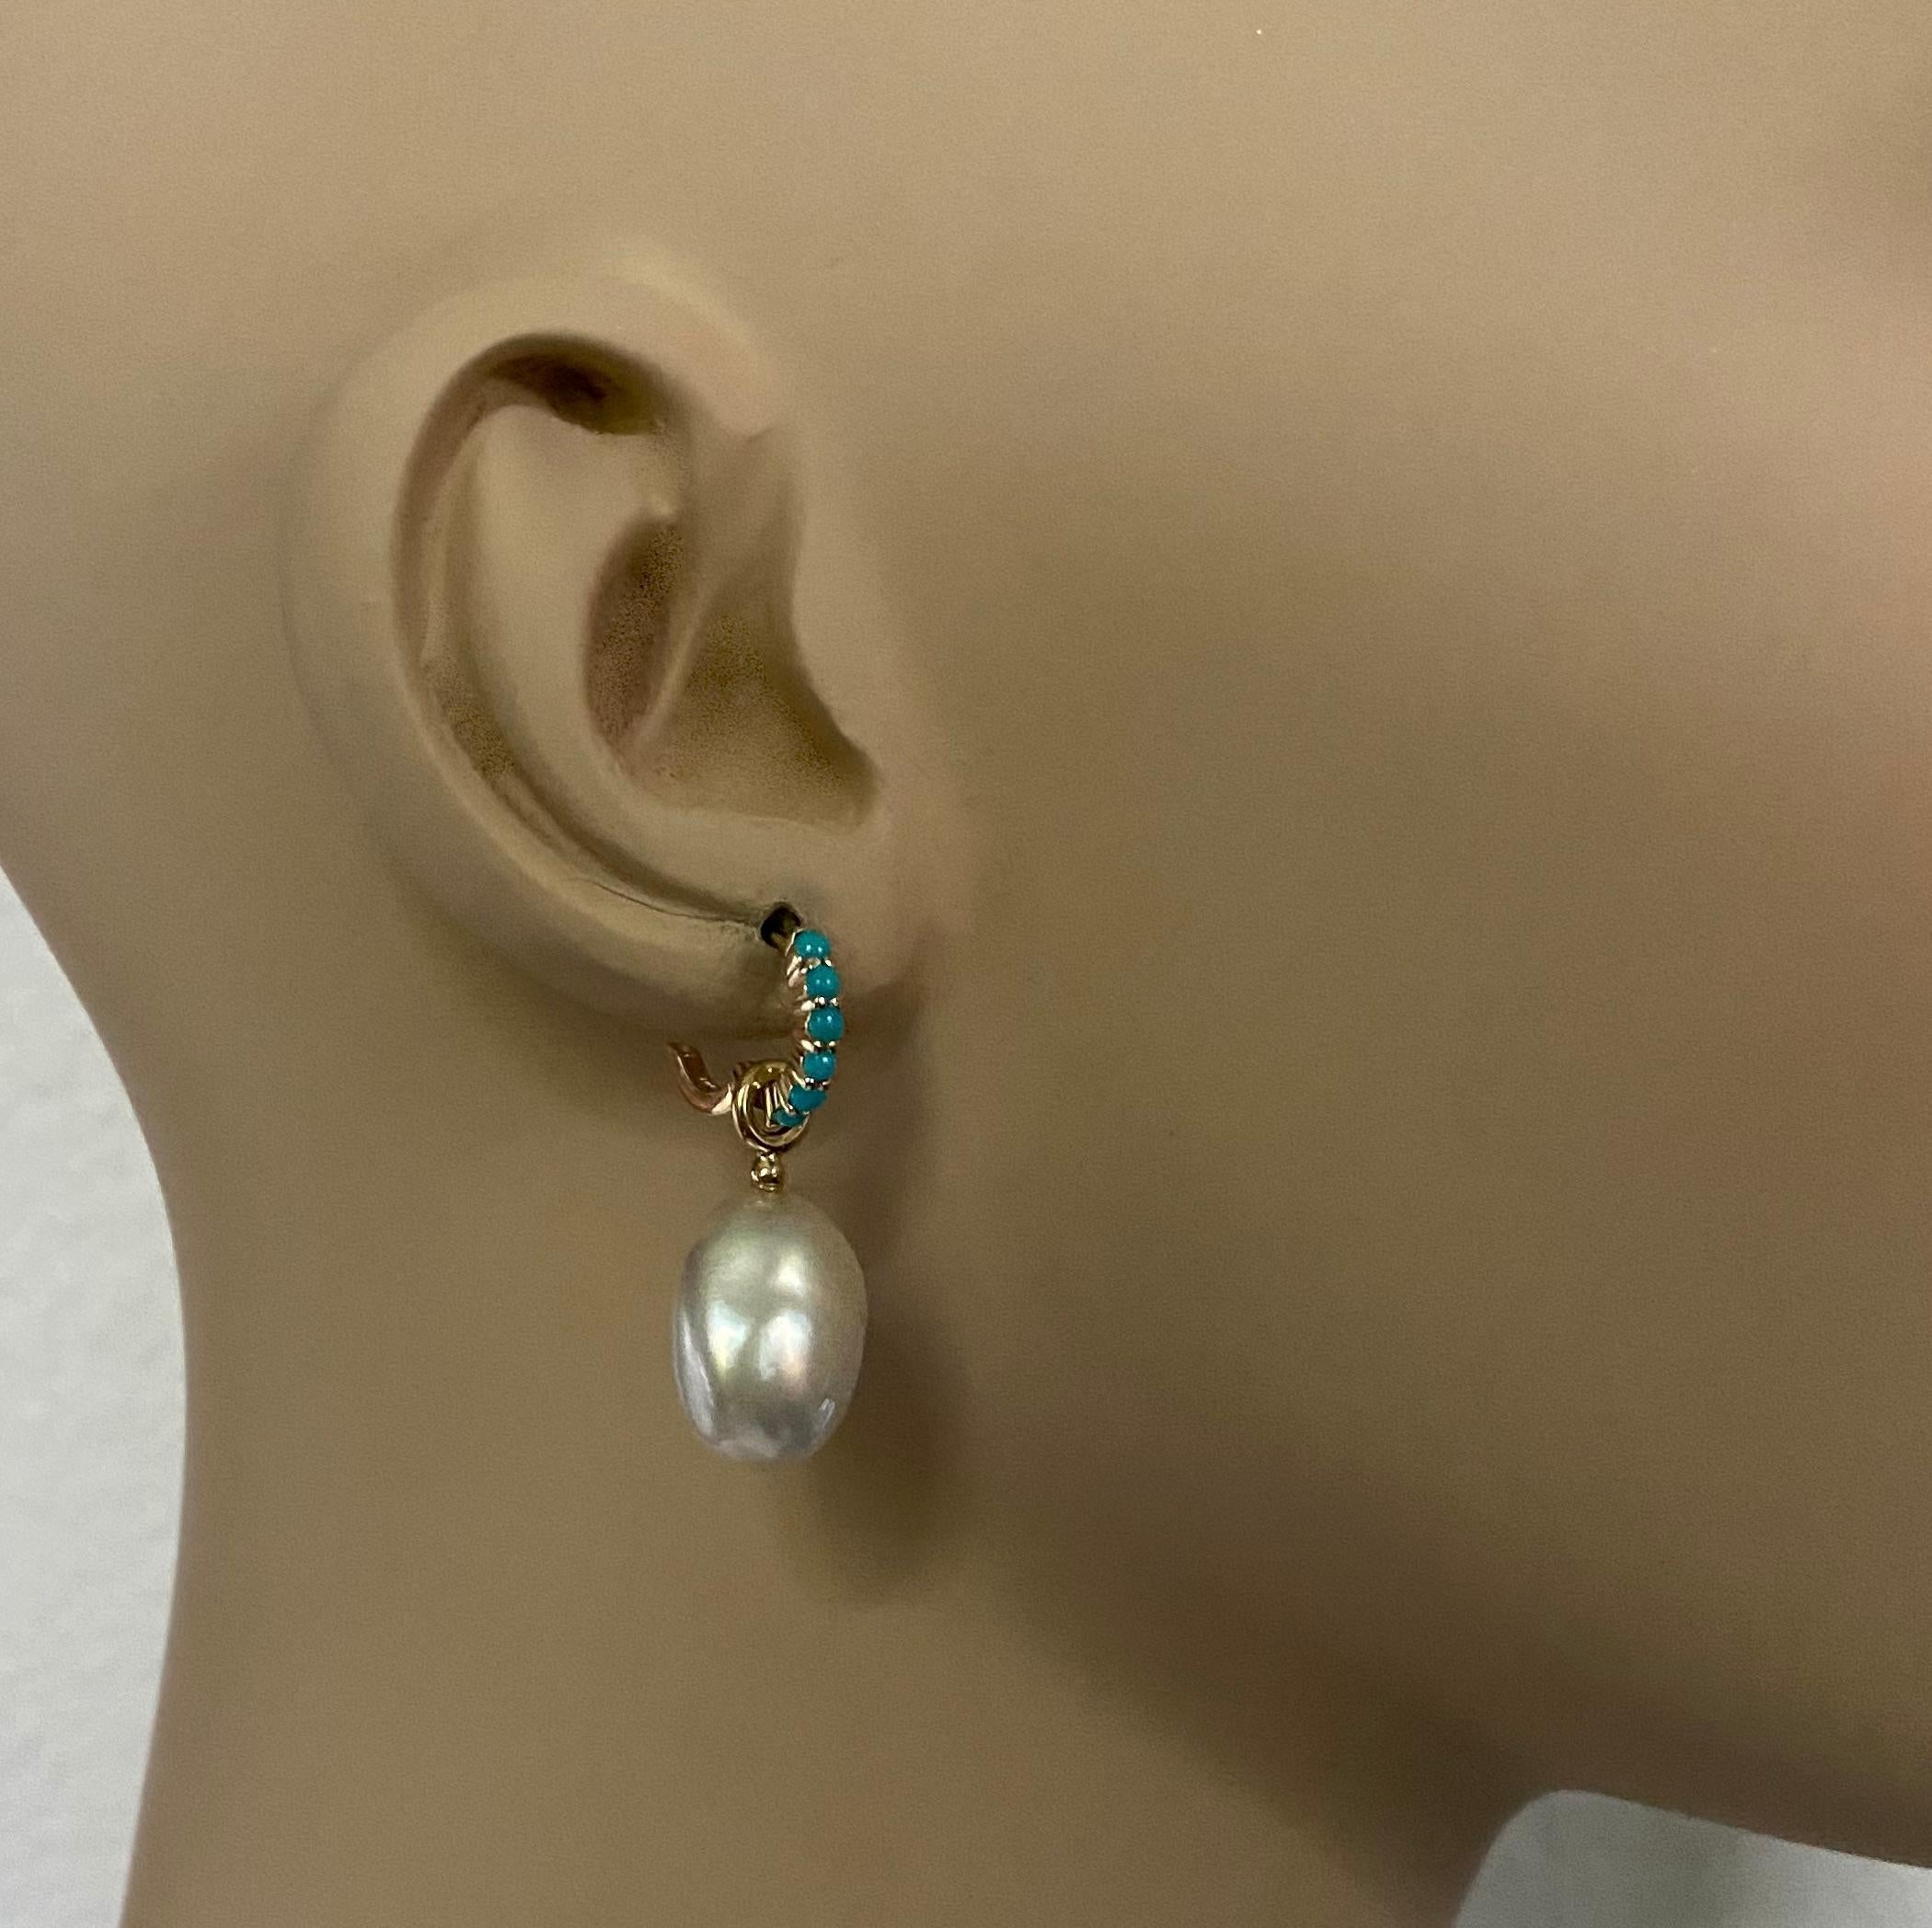 Paspaley South Seas pearls are paired with turquoise 